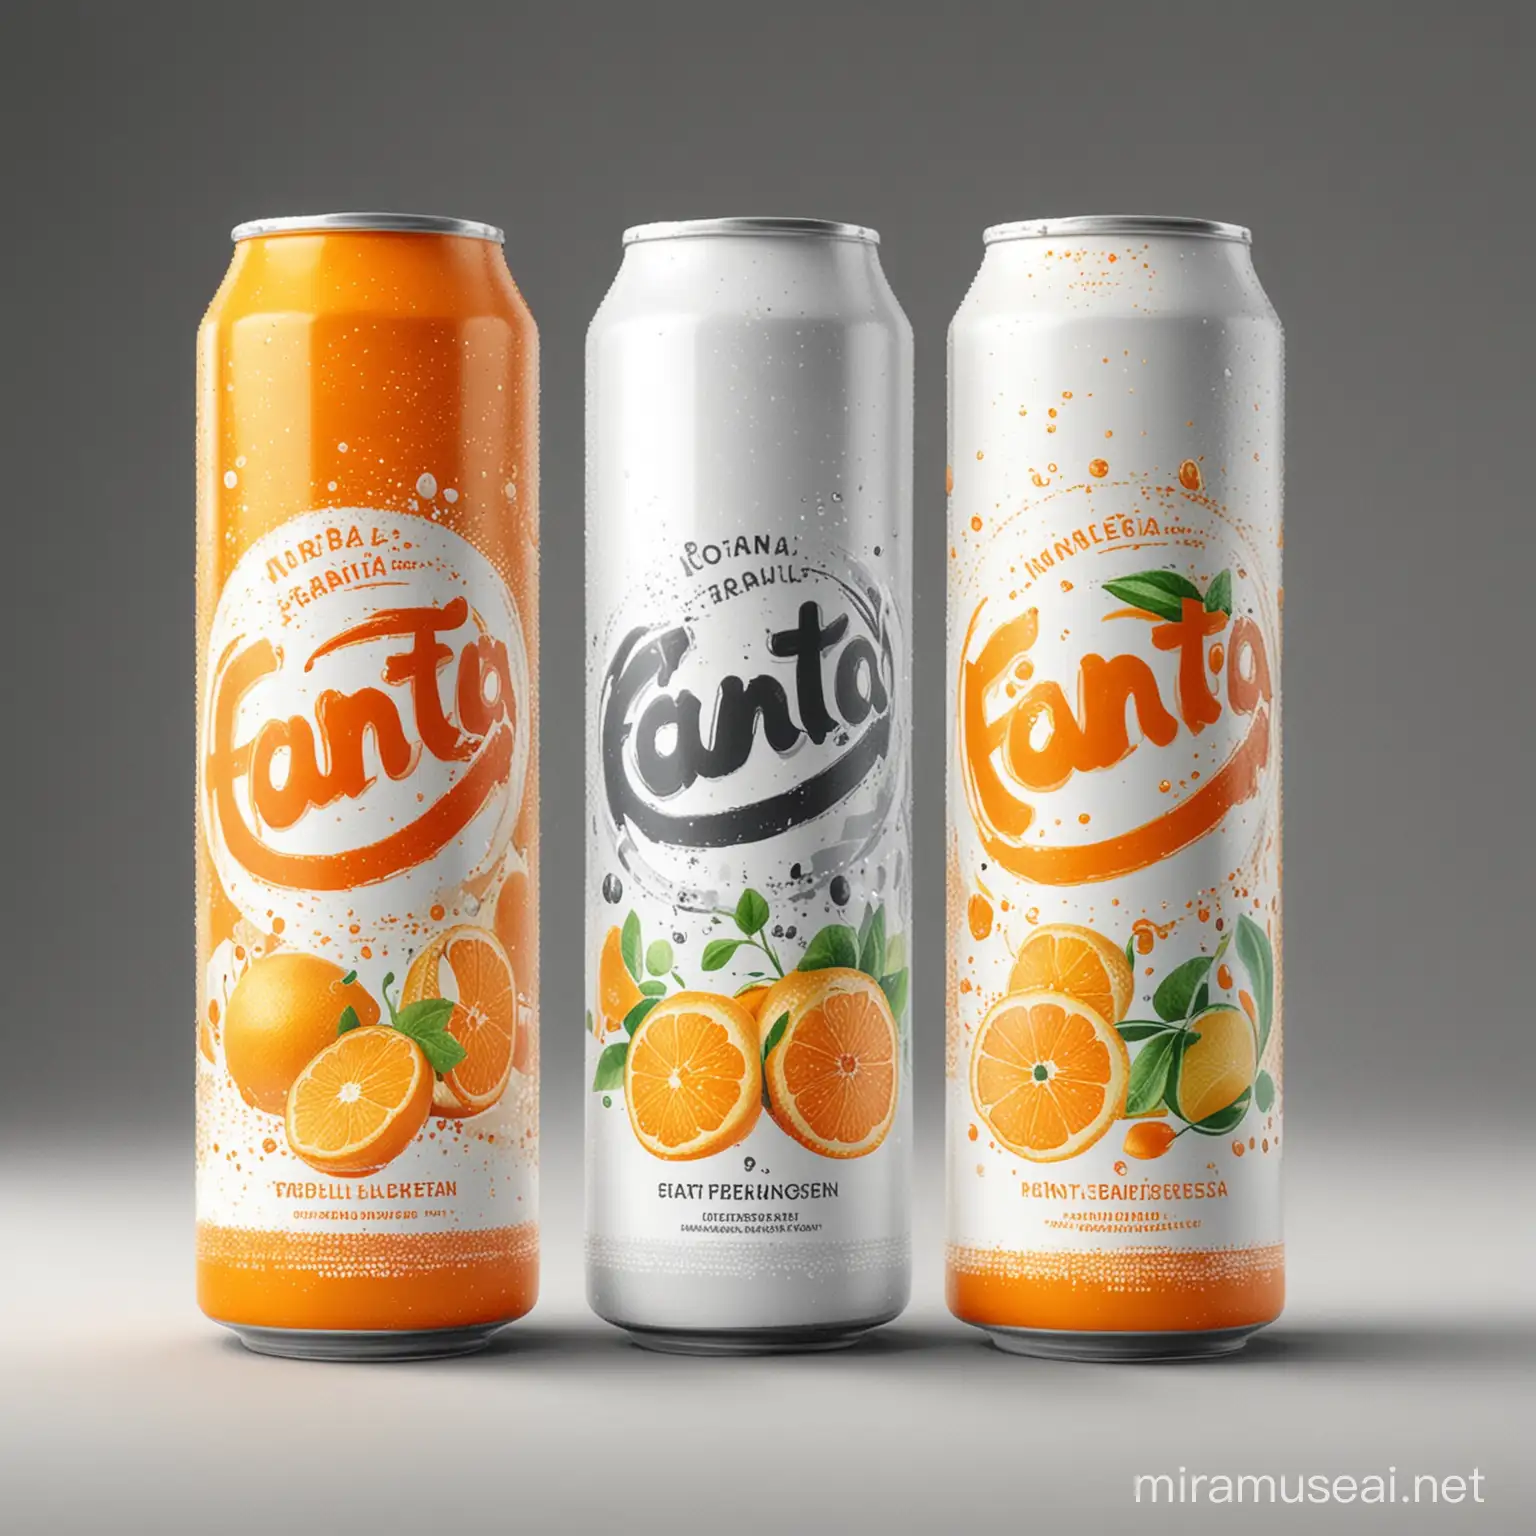 I'm looking for a designer who can create an attractive, modern premium label for a carbonated soft drink that will be appealing to both children and adults. The soft drink is orange carbonated soft drink like fanta. Key design elements should include:  -Premium Design - Incorporation of our brand logo (Lower text premium water can be removed and logo can be made white). - A section for nutritional information - Inclusion of engaging, eye-catching images  Graphic designers with experience in packaging and FMCG are preferred. A portfolio showcasing similar projects would be highly beneficial. Creativity and a keen eye for detail are crucial for this project.